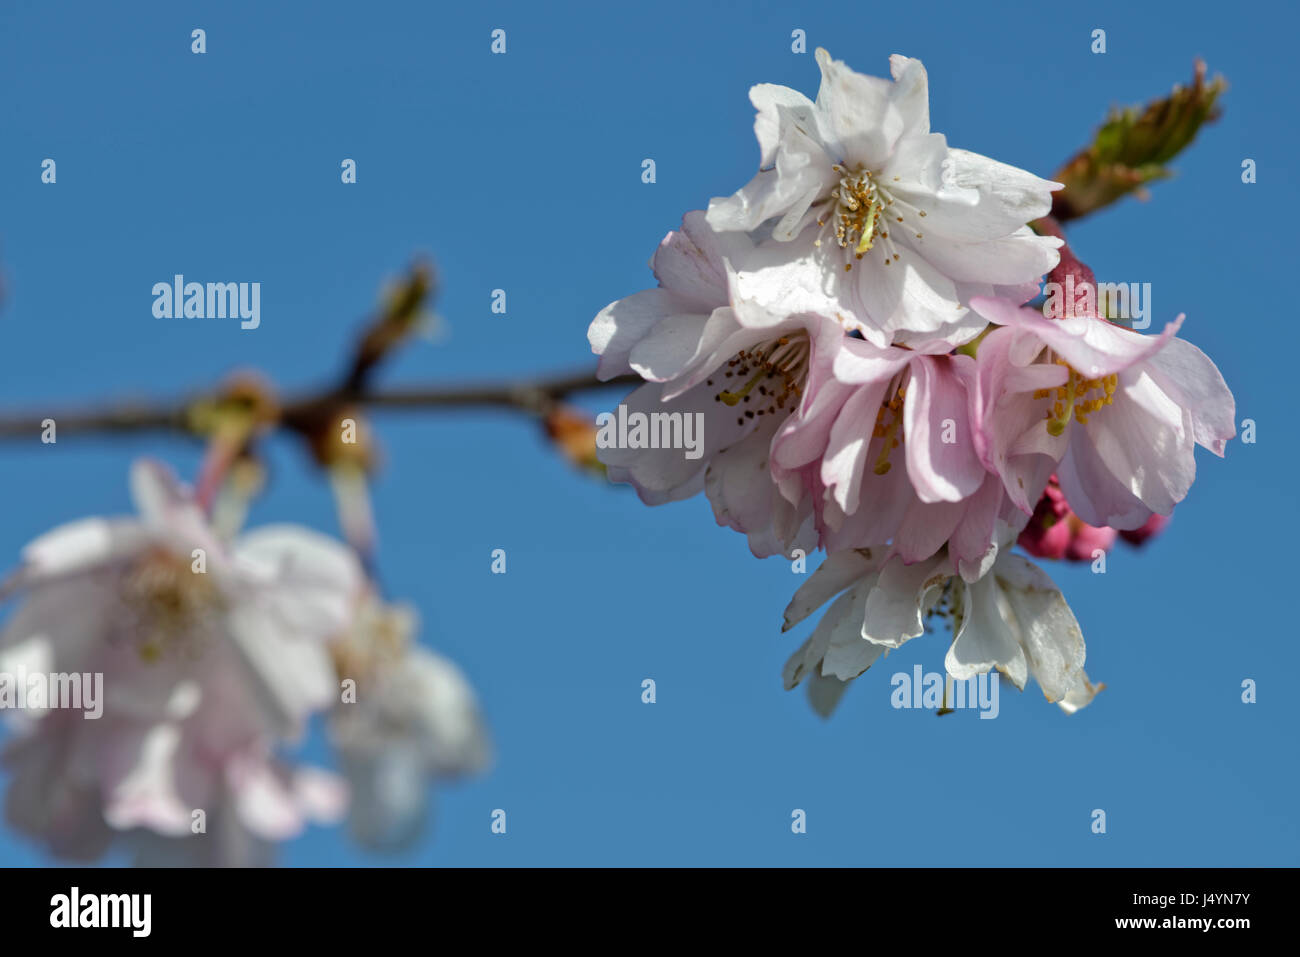 Closeup of almost white and pink cherry flowers (Prunus avium). The details of the flower (stamen, anther, stigma and style) together with the petals are very pretty. Stock Photo